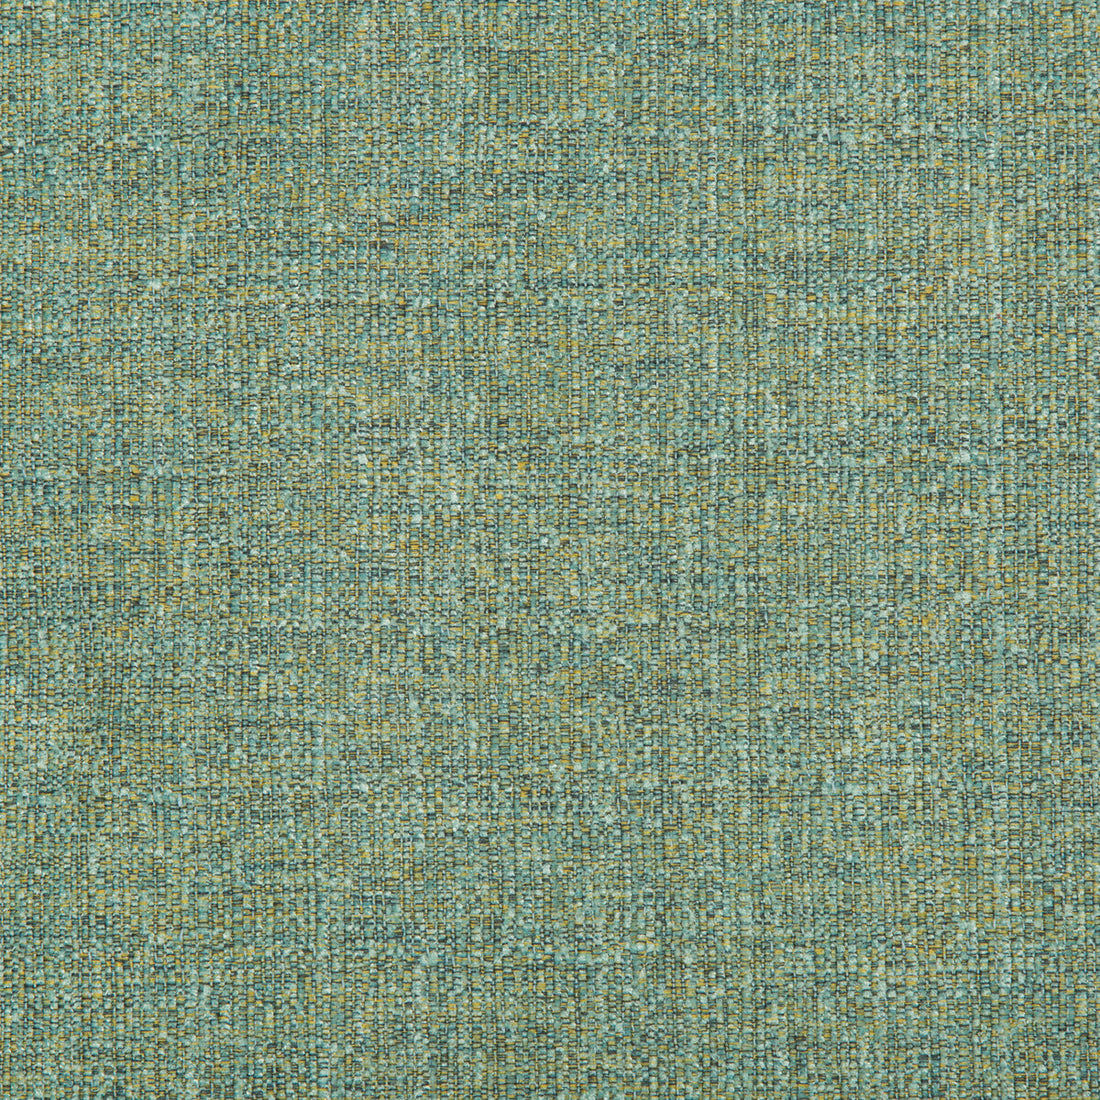 Kravet Contract fabric in 35479-423 color - pattern 35479.423.0 - by Kravet Contract